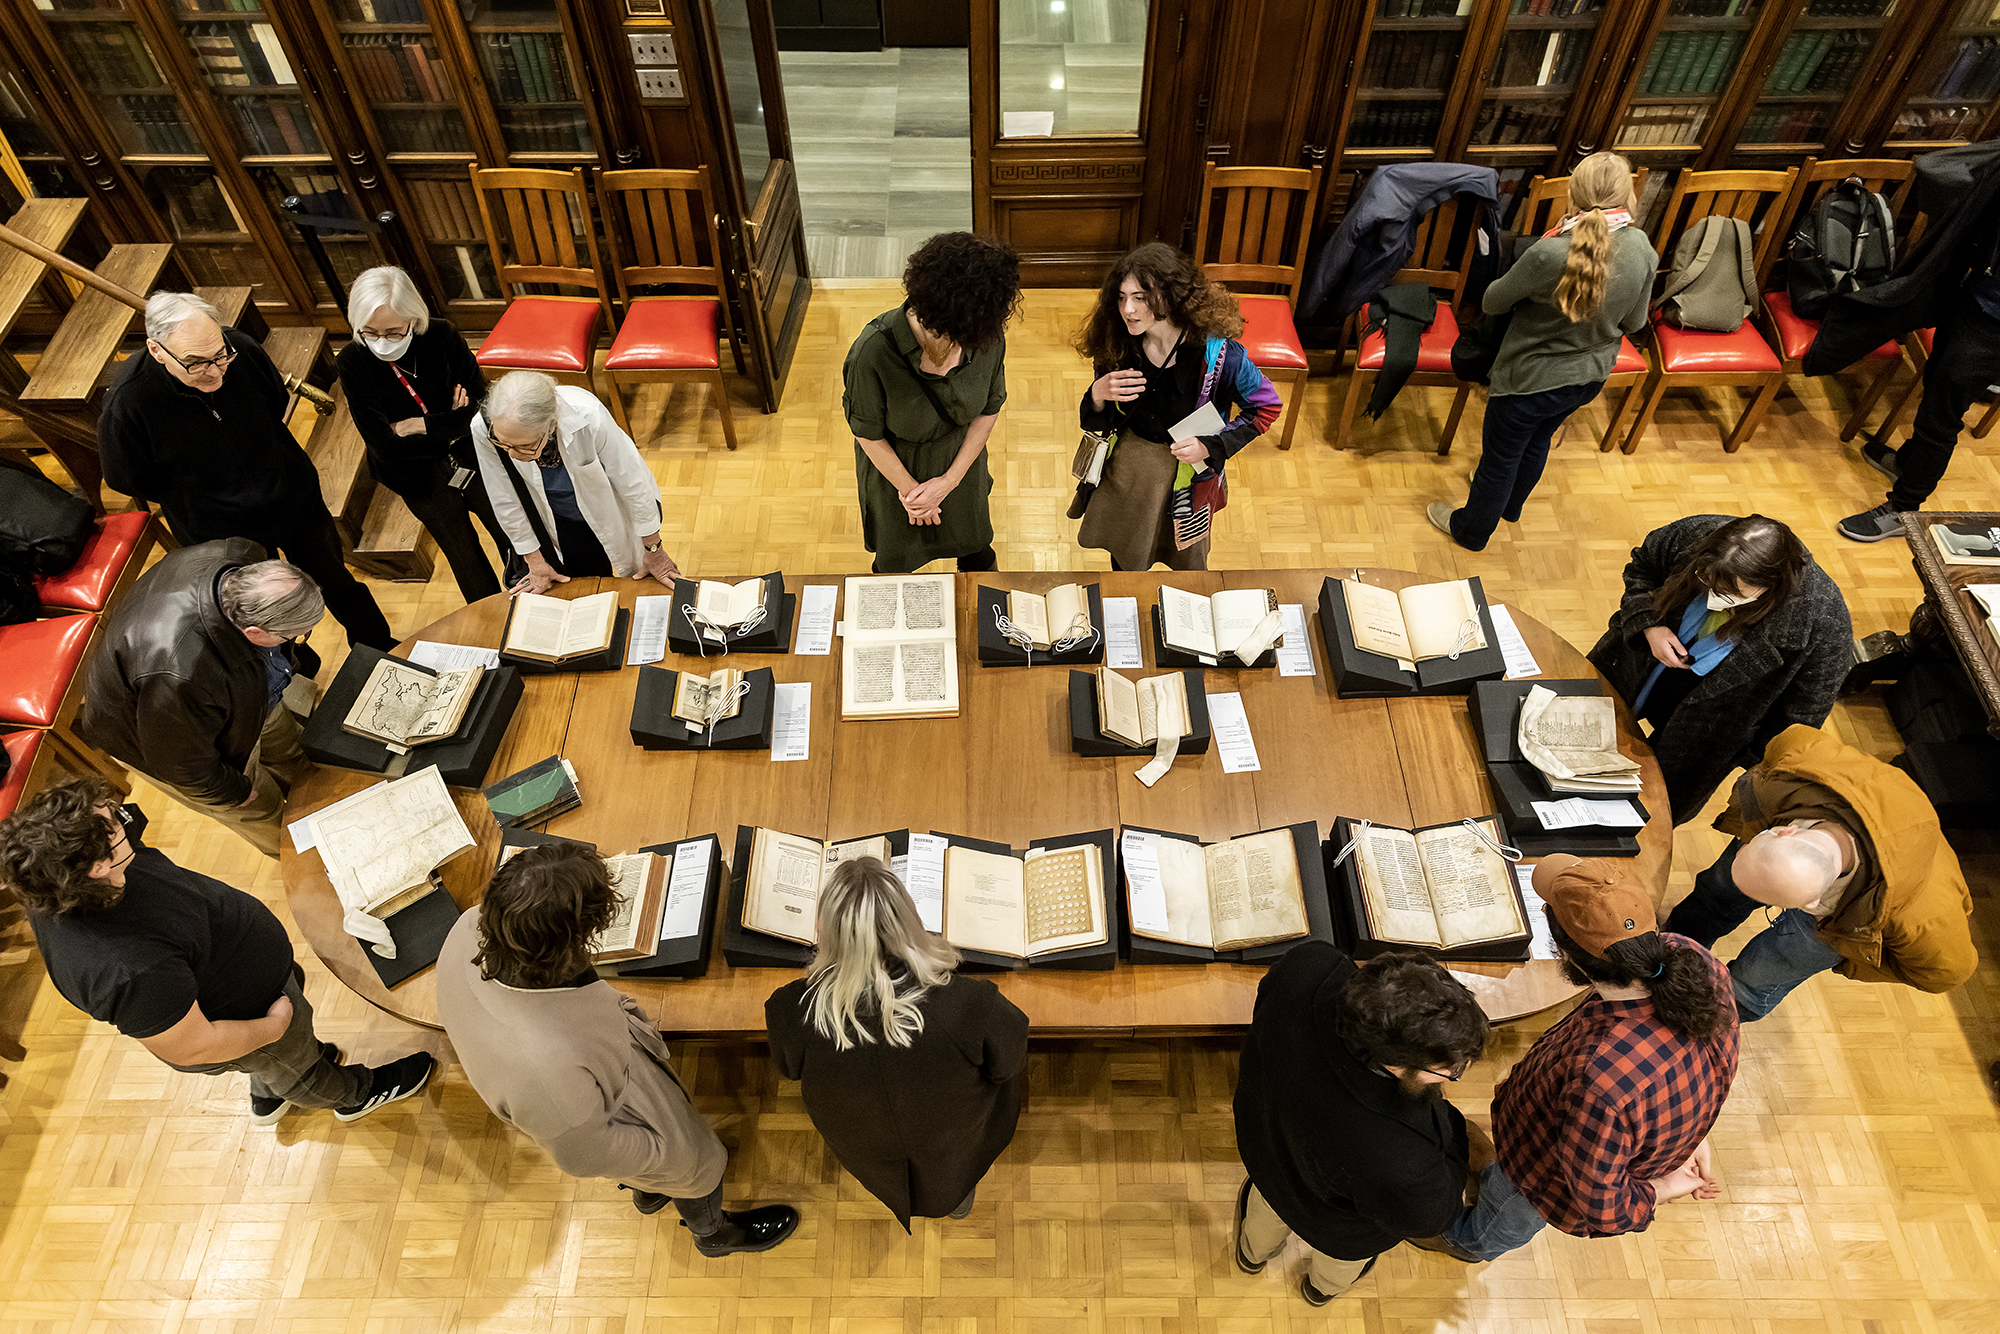 An overhead view of a long table in a historic library room with several open texts 